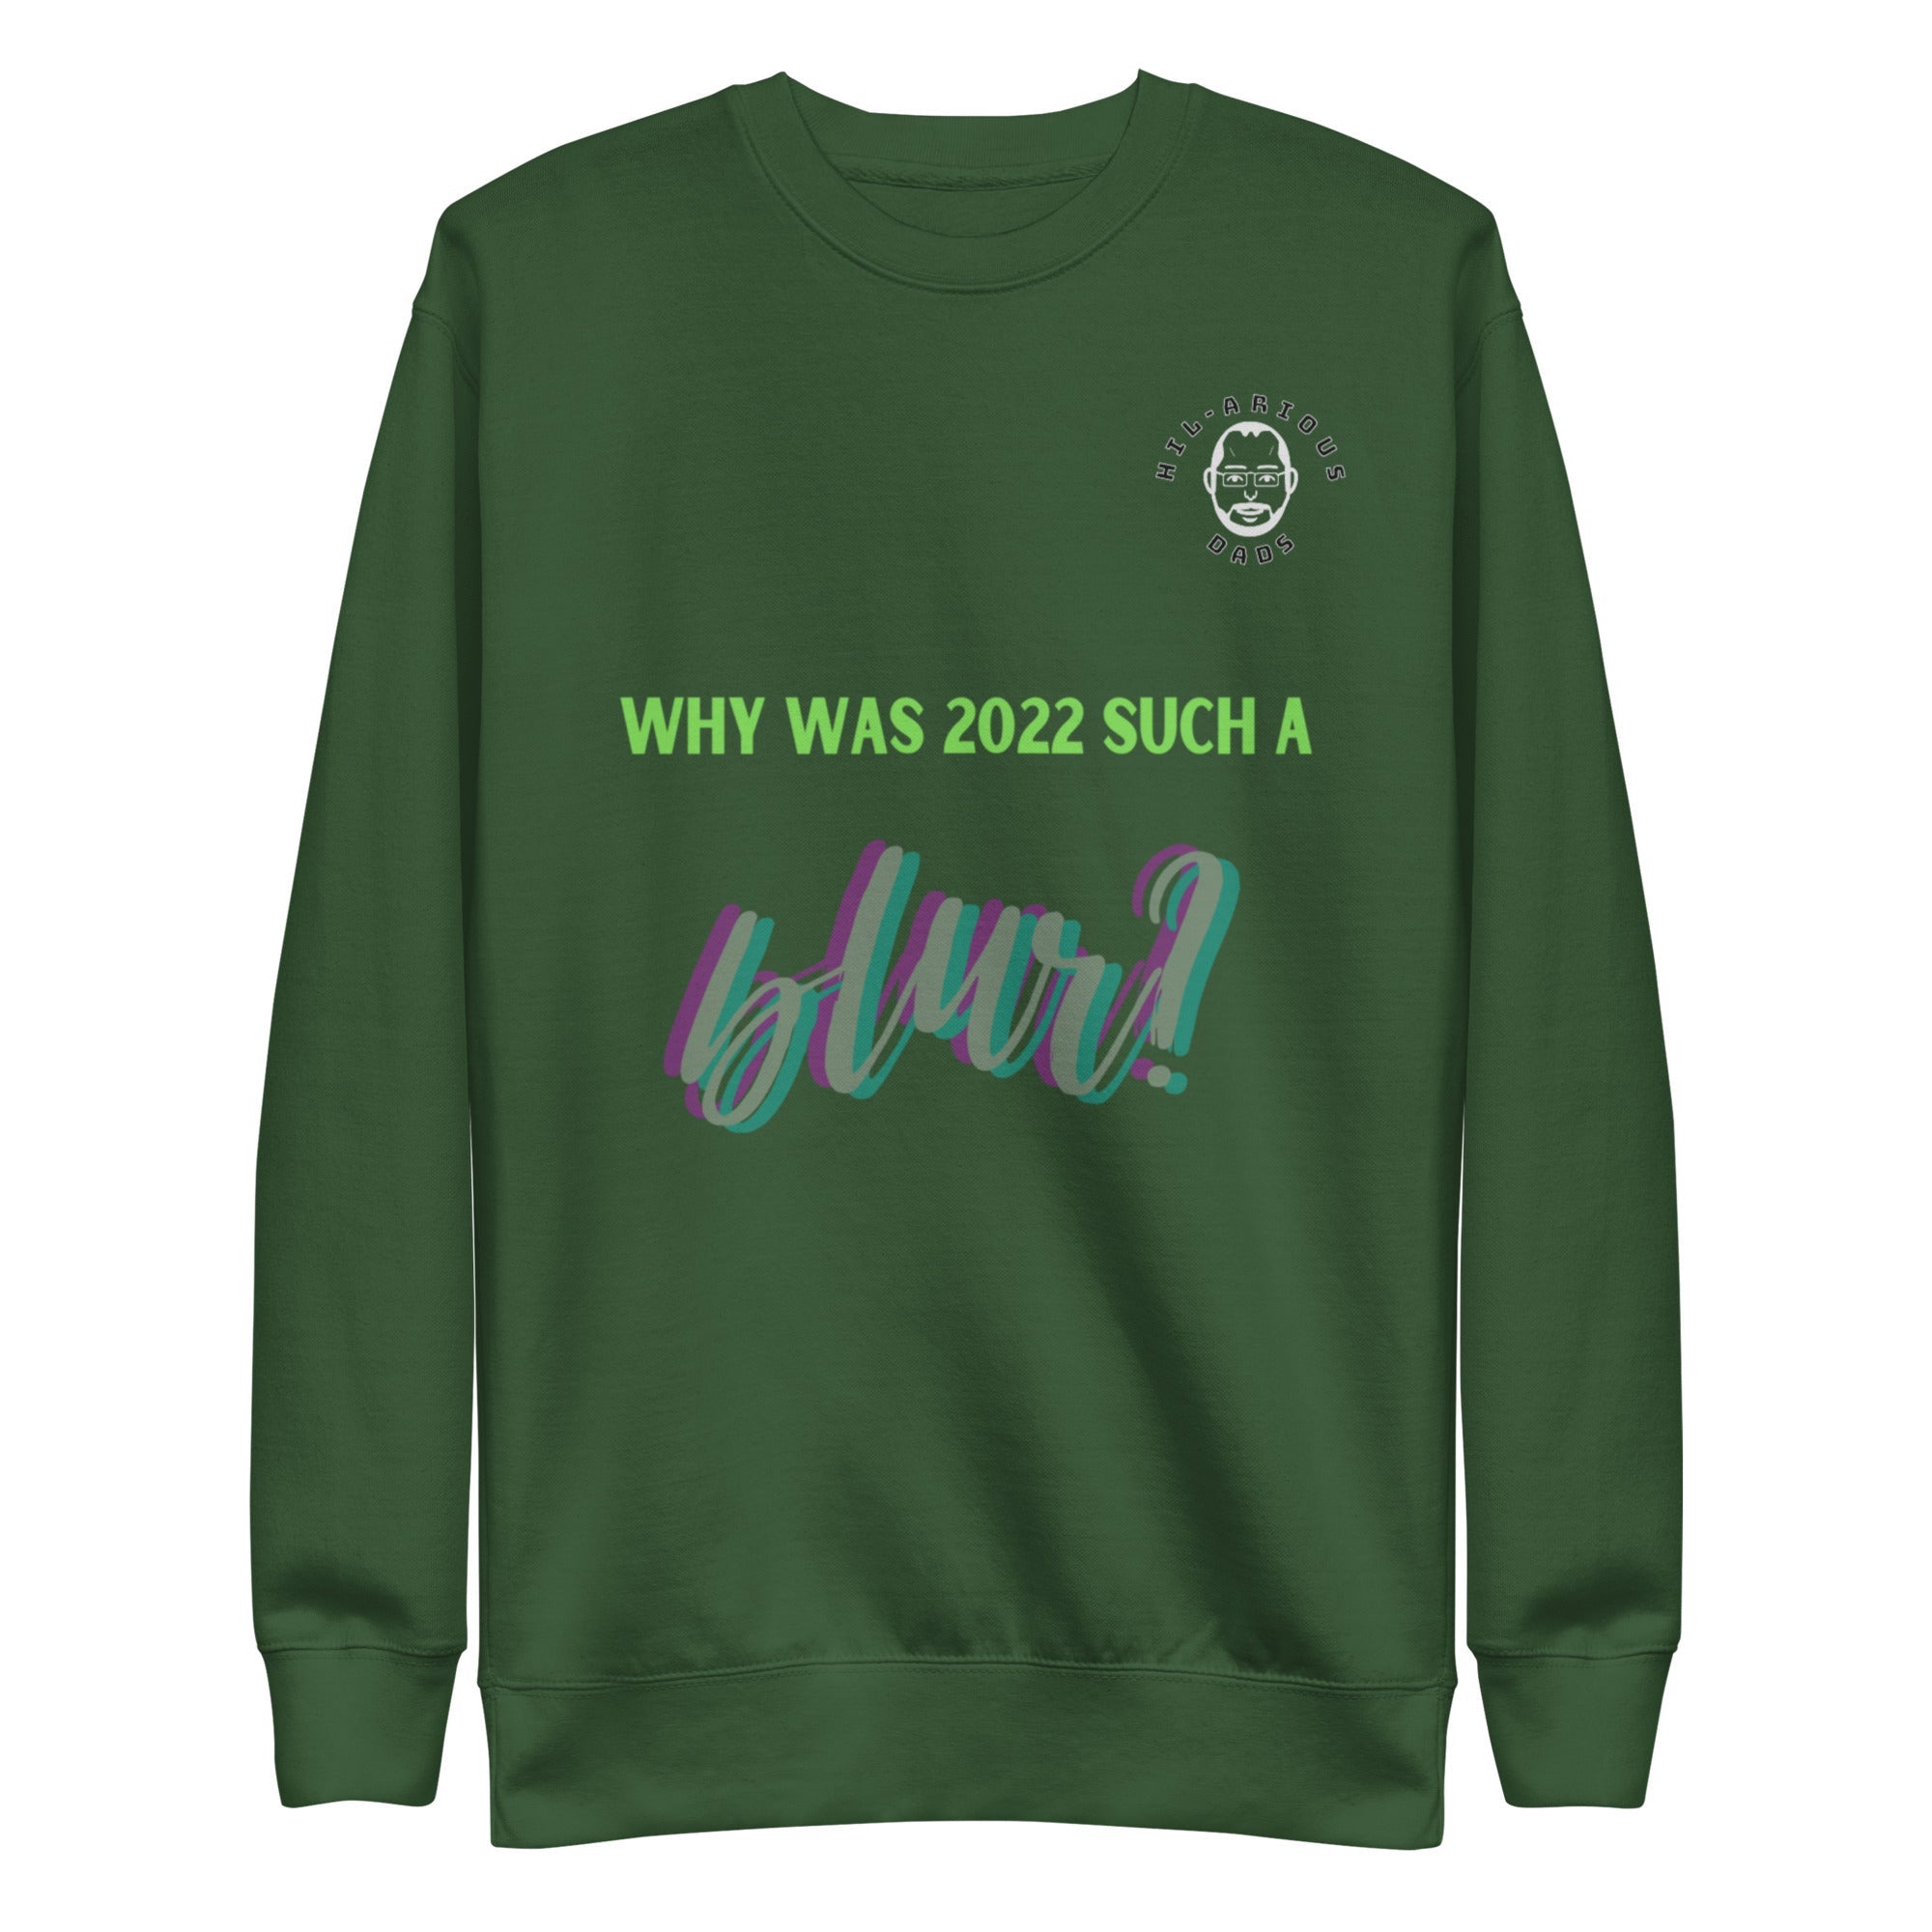 Why was 2022 such a blur?-Sweatshirt - Hil-arious Dads